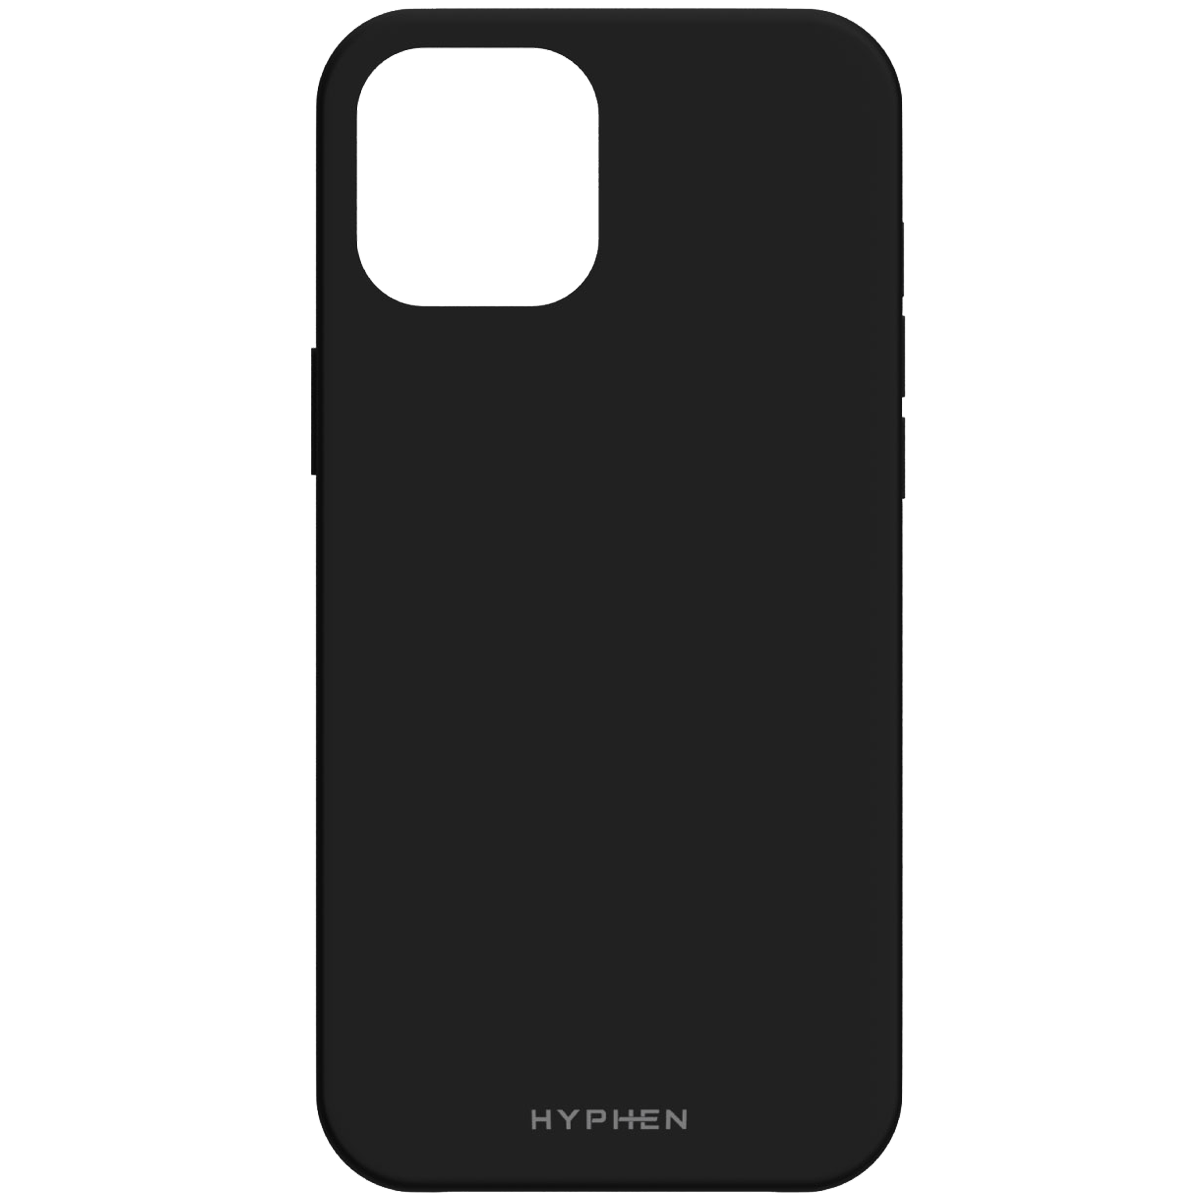 hyphen - hyphen Silicone Back Case For iPhone 12 Mini (Water Resistant, hpC-SXII540138, Black)